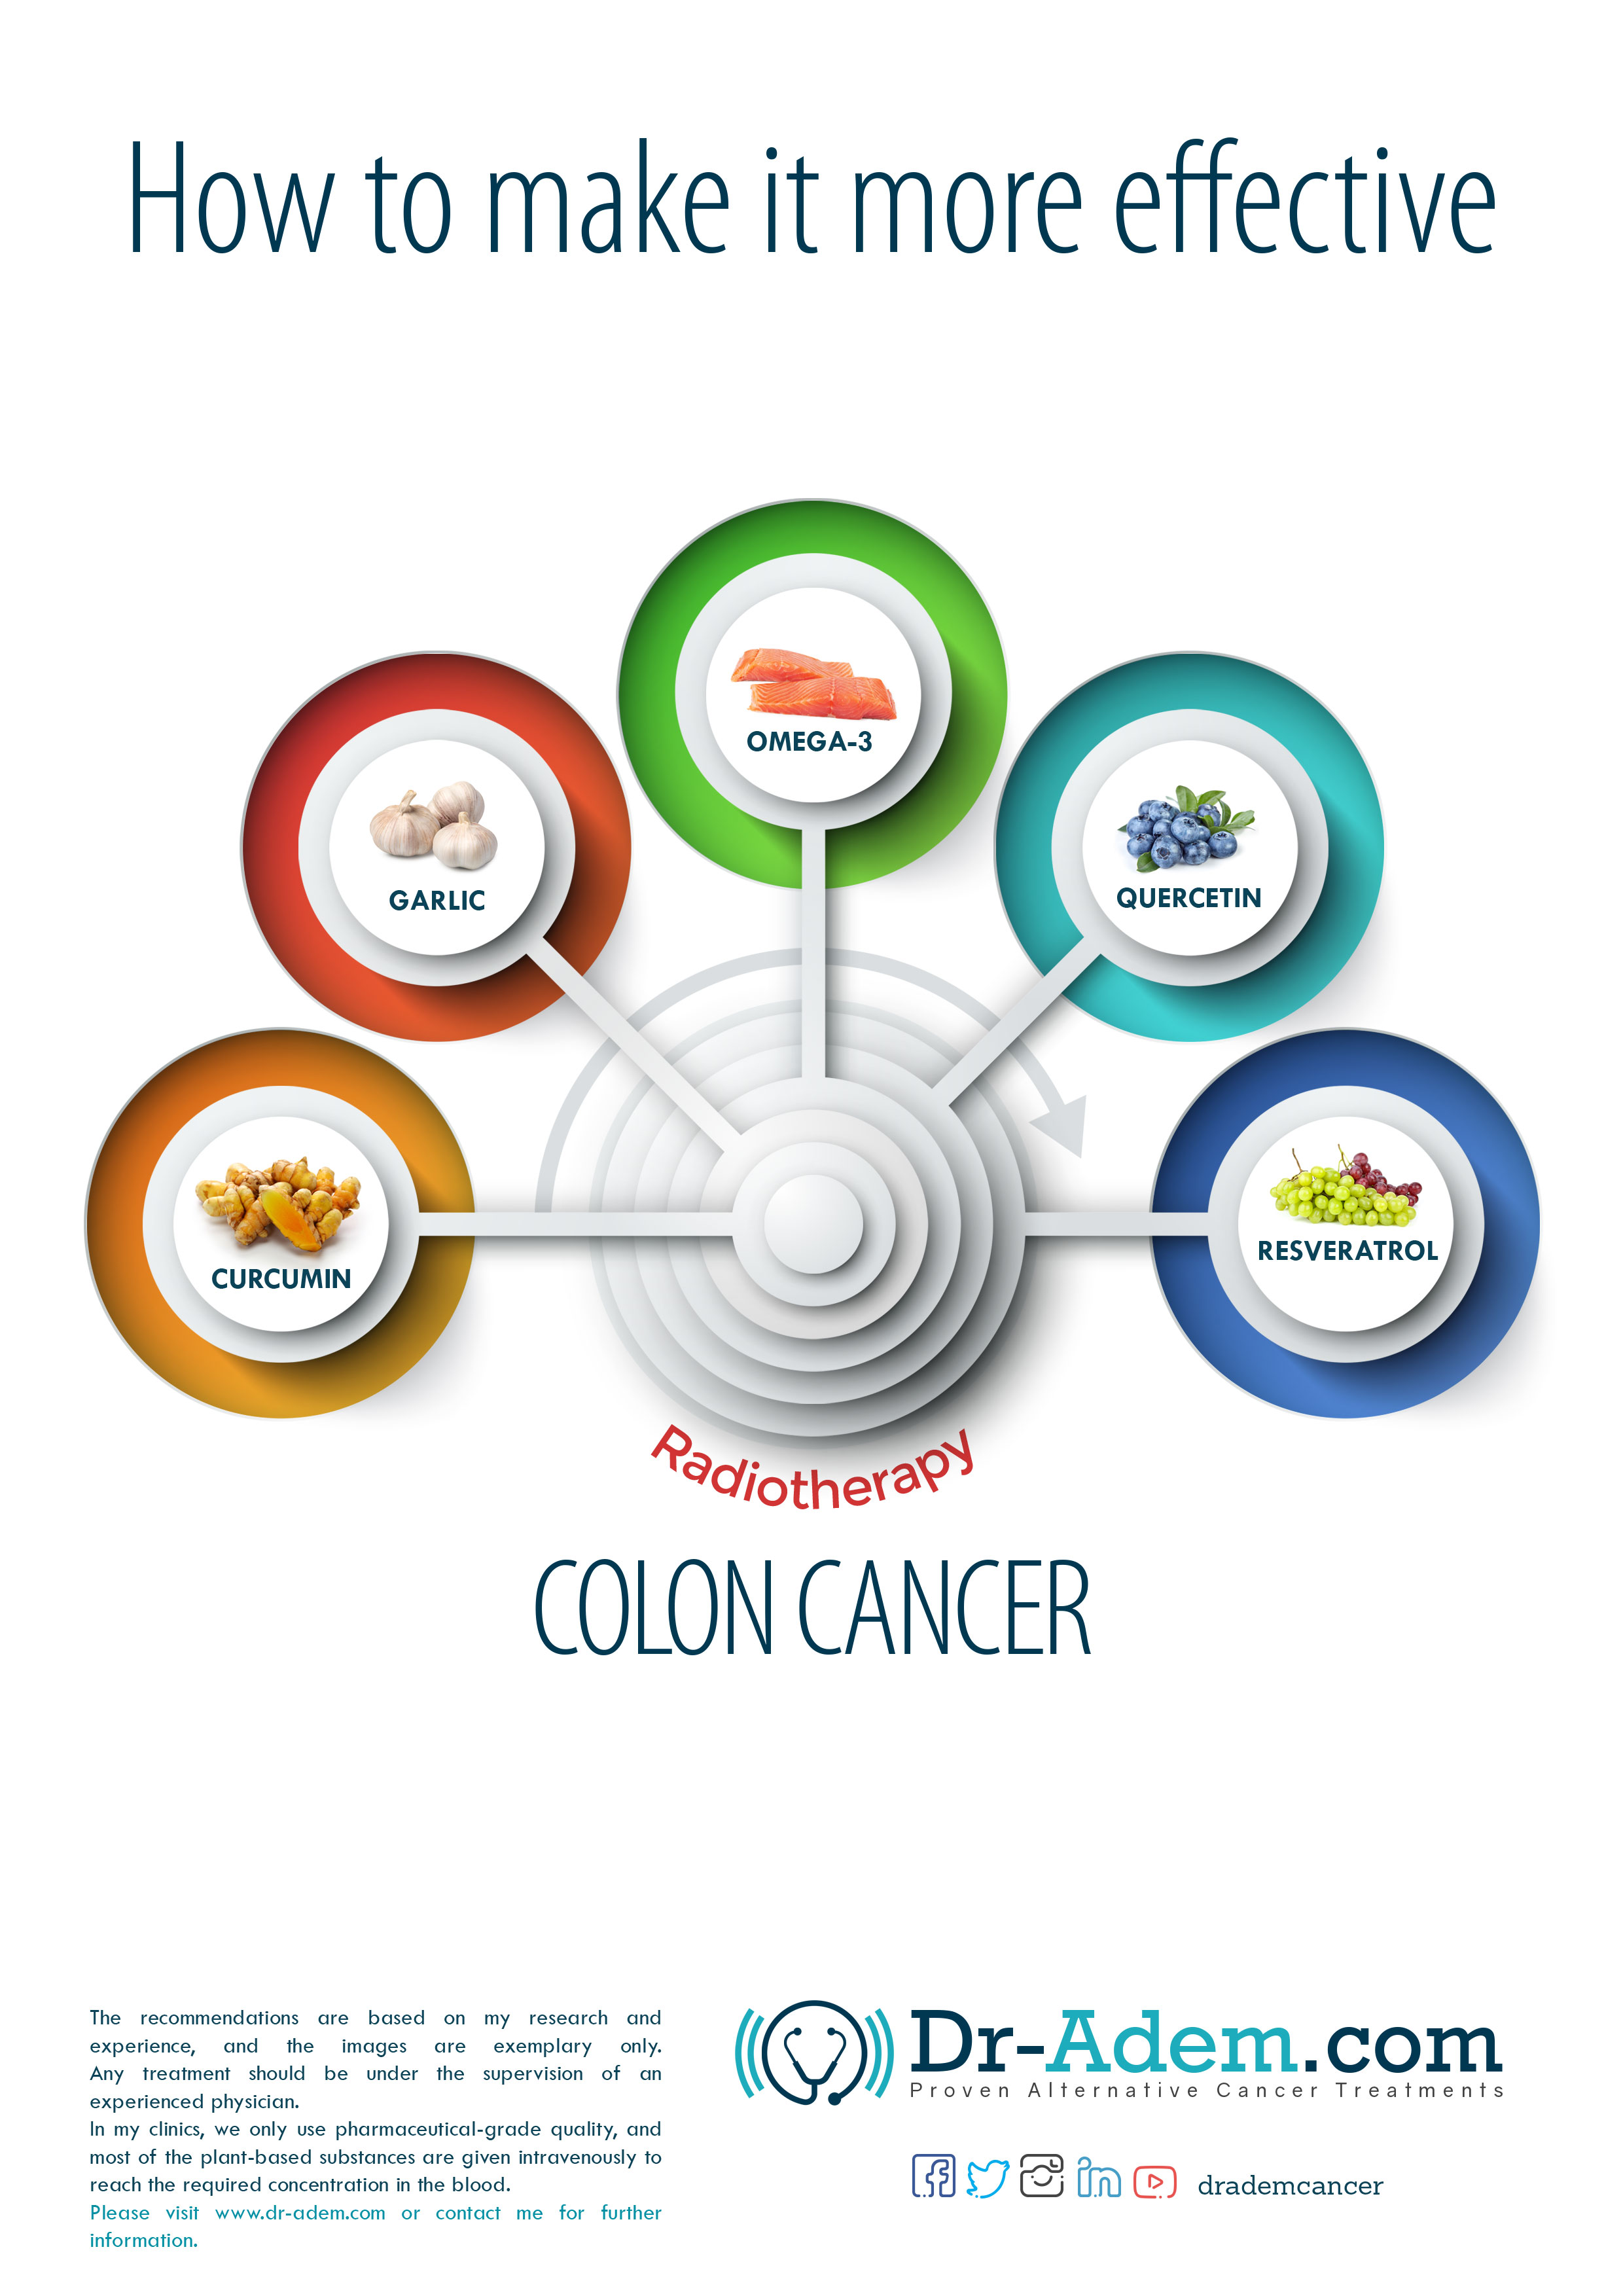 Radiotherapy For Colon Cancer